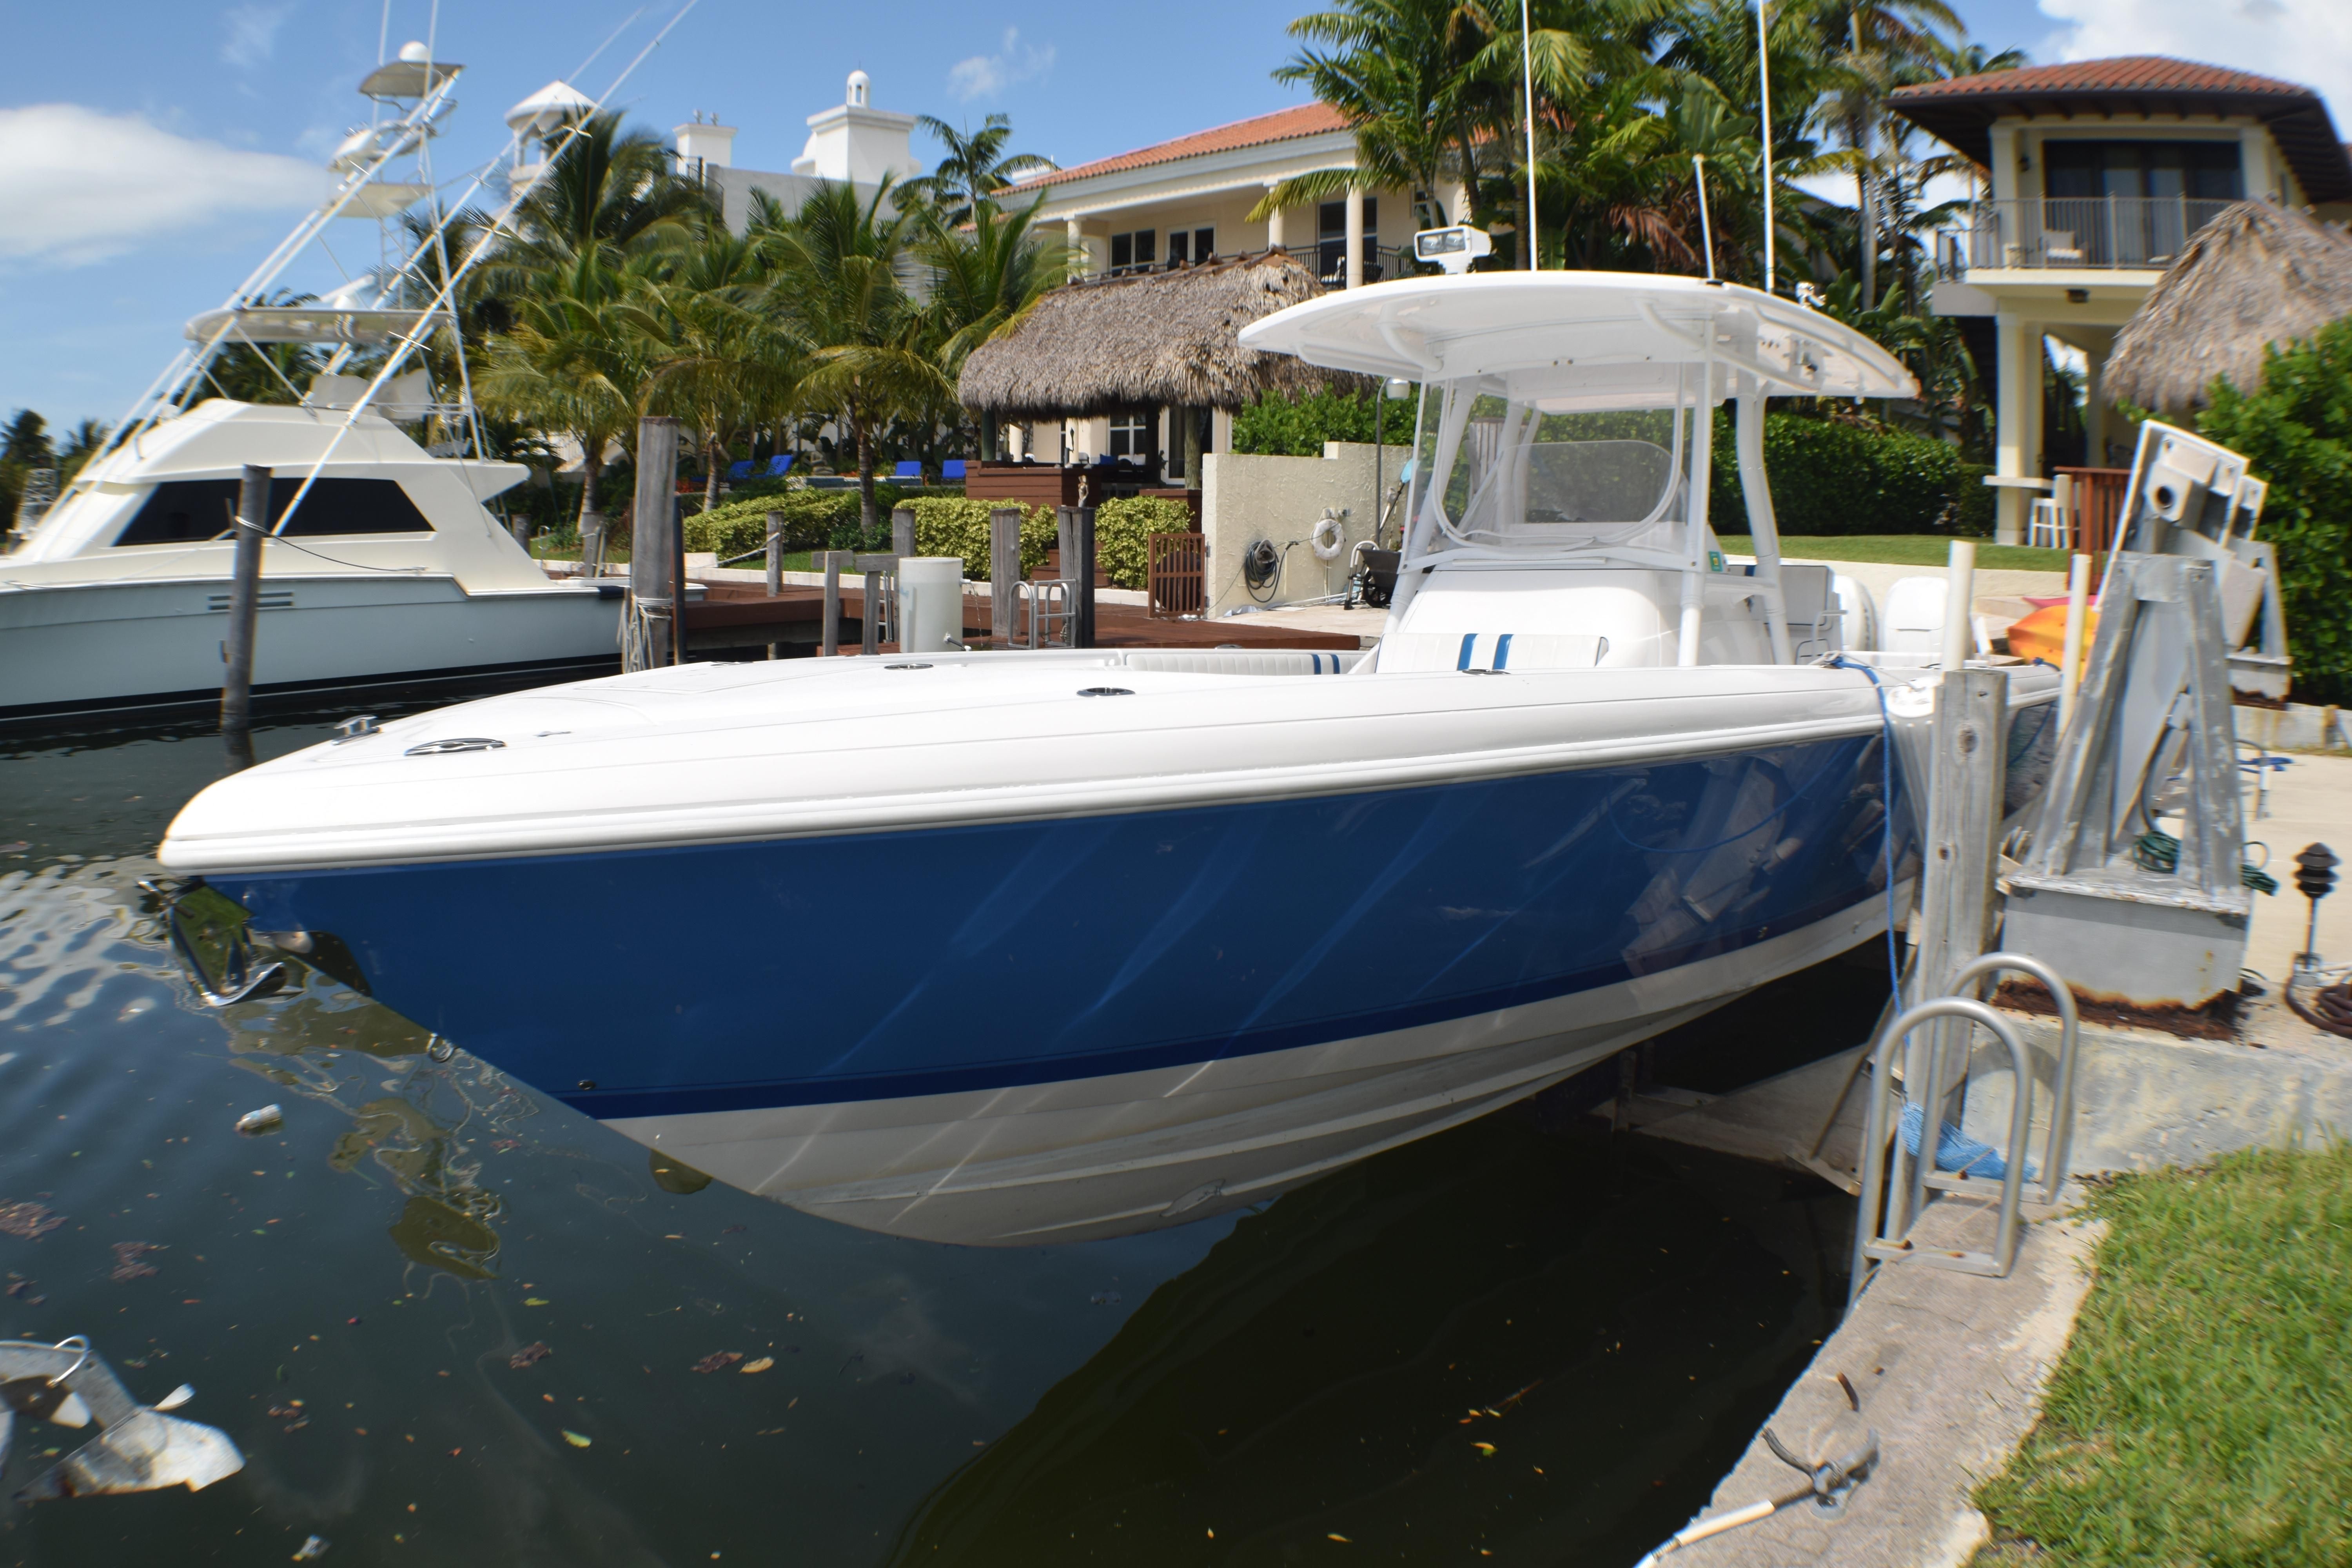 2014 Intrepid 327 Center Console Center Console for sale - YachtWorld